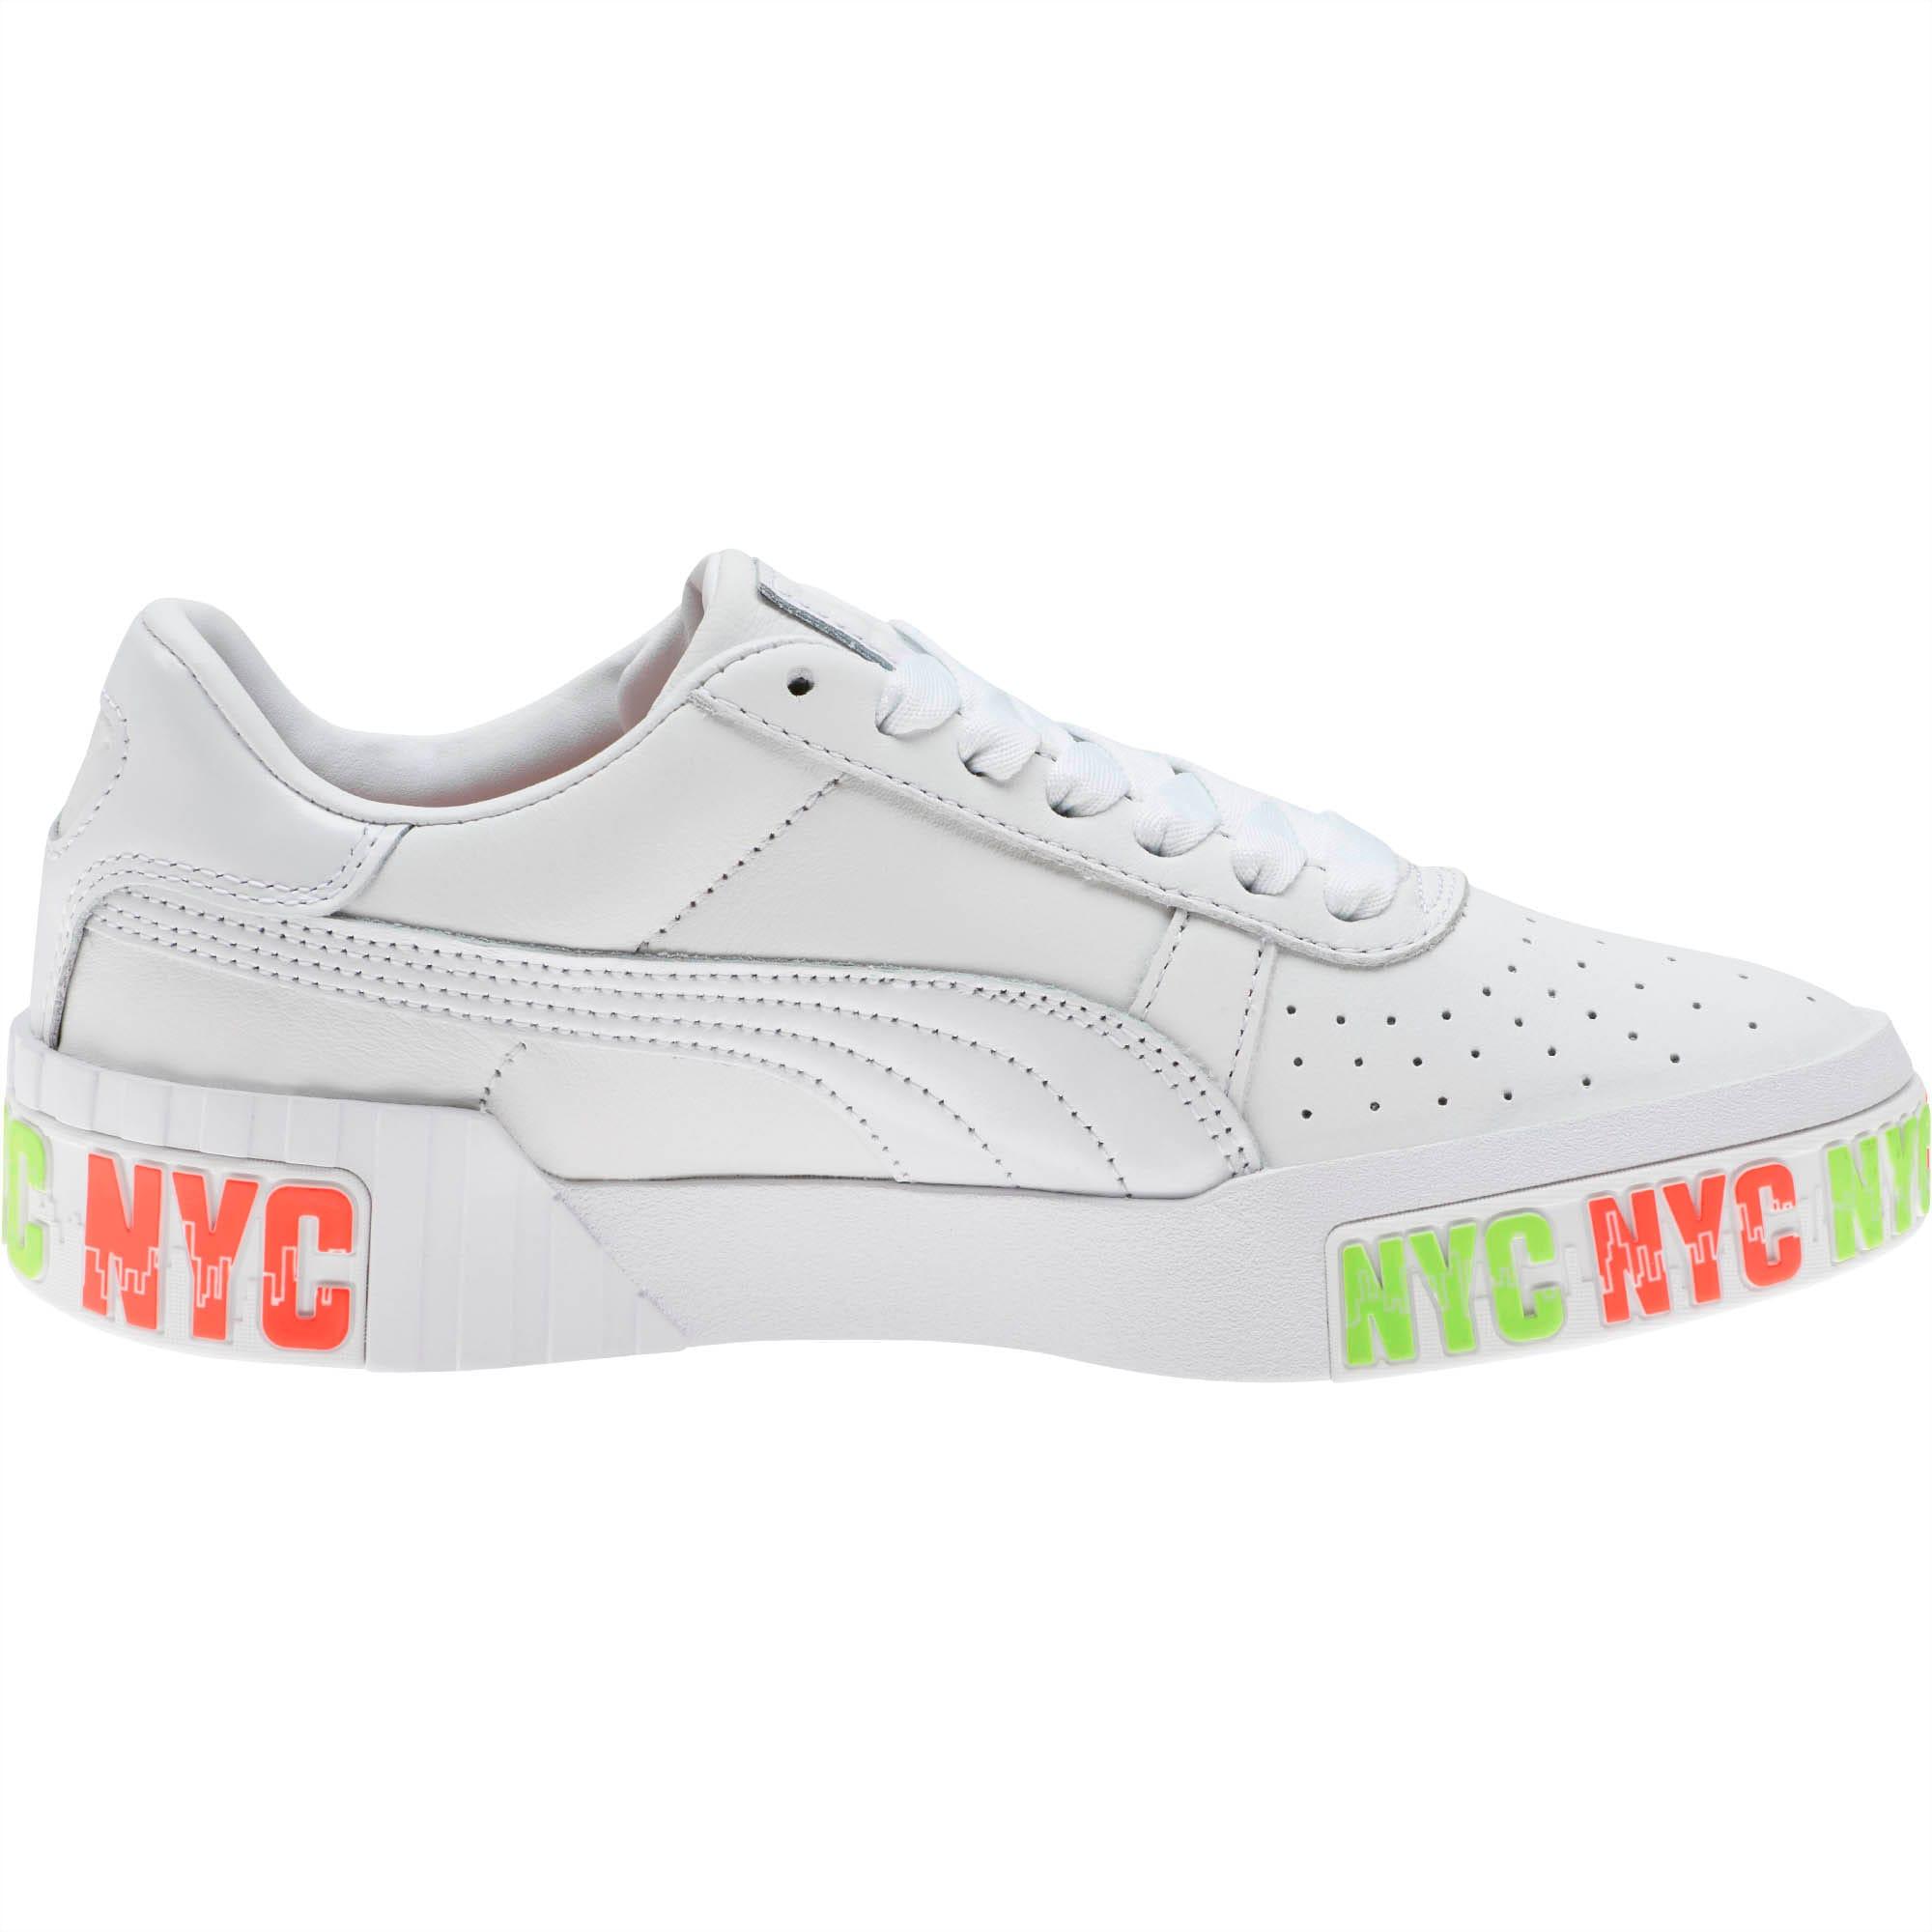 PUMA Leather Cali Bold Nyc Sneakers in White - Lyst